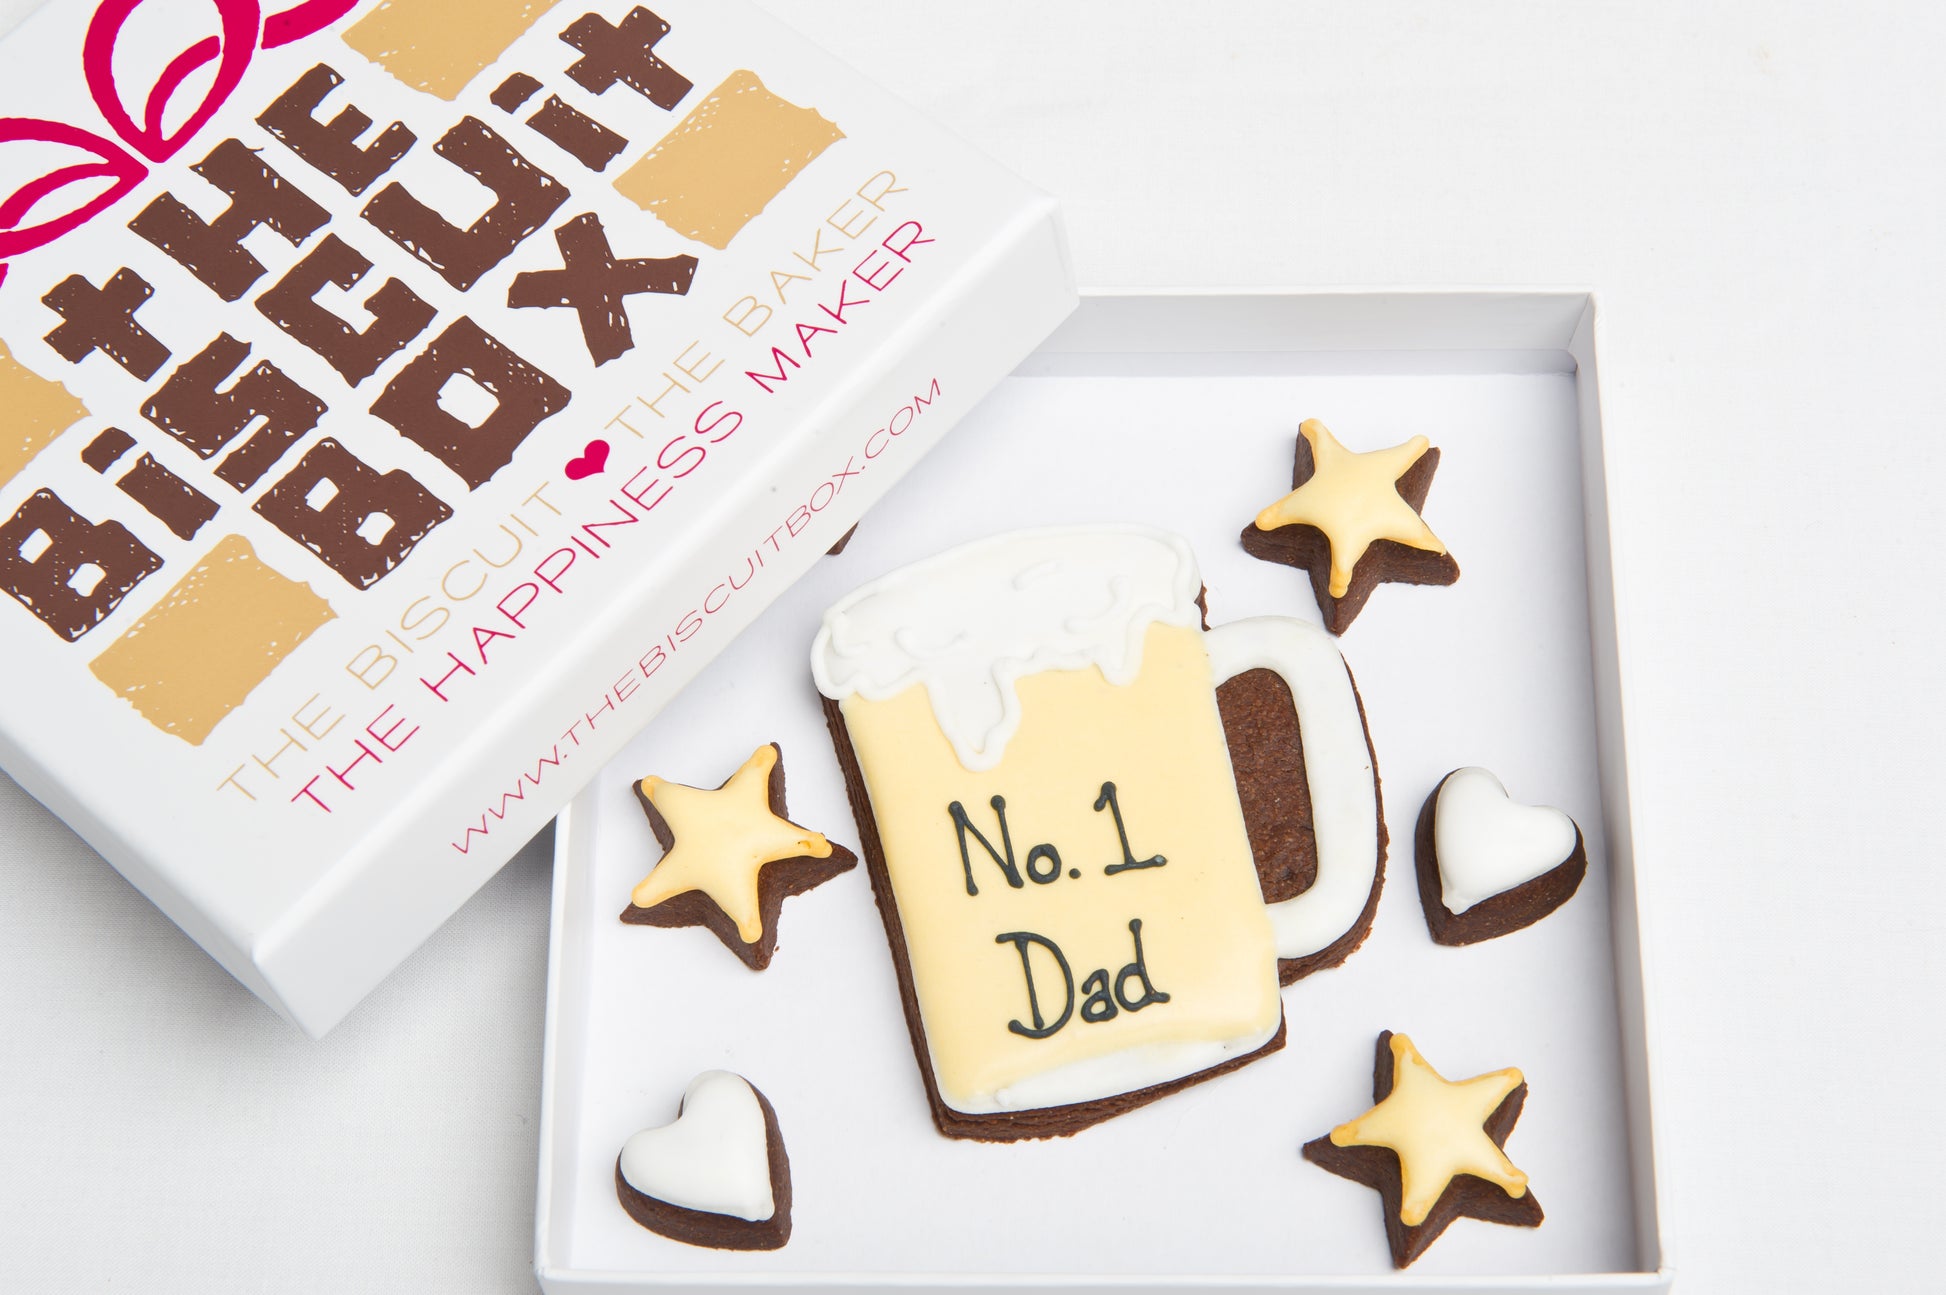 cheers dad biscuit gift for fathers day. Iced beer mug with black icing saying cheers dad. Includes mini star cookies all in a box for fathers day.